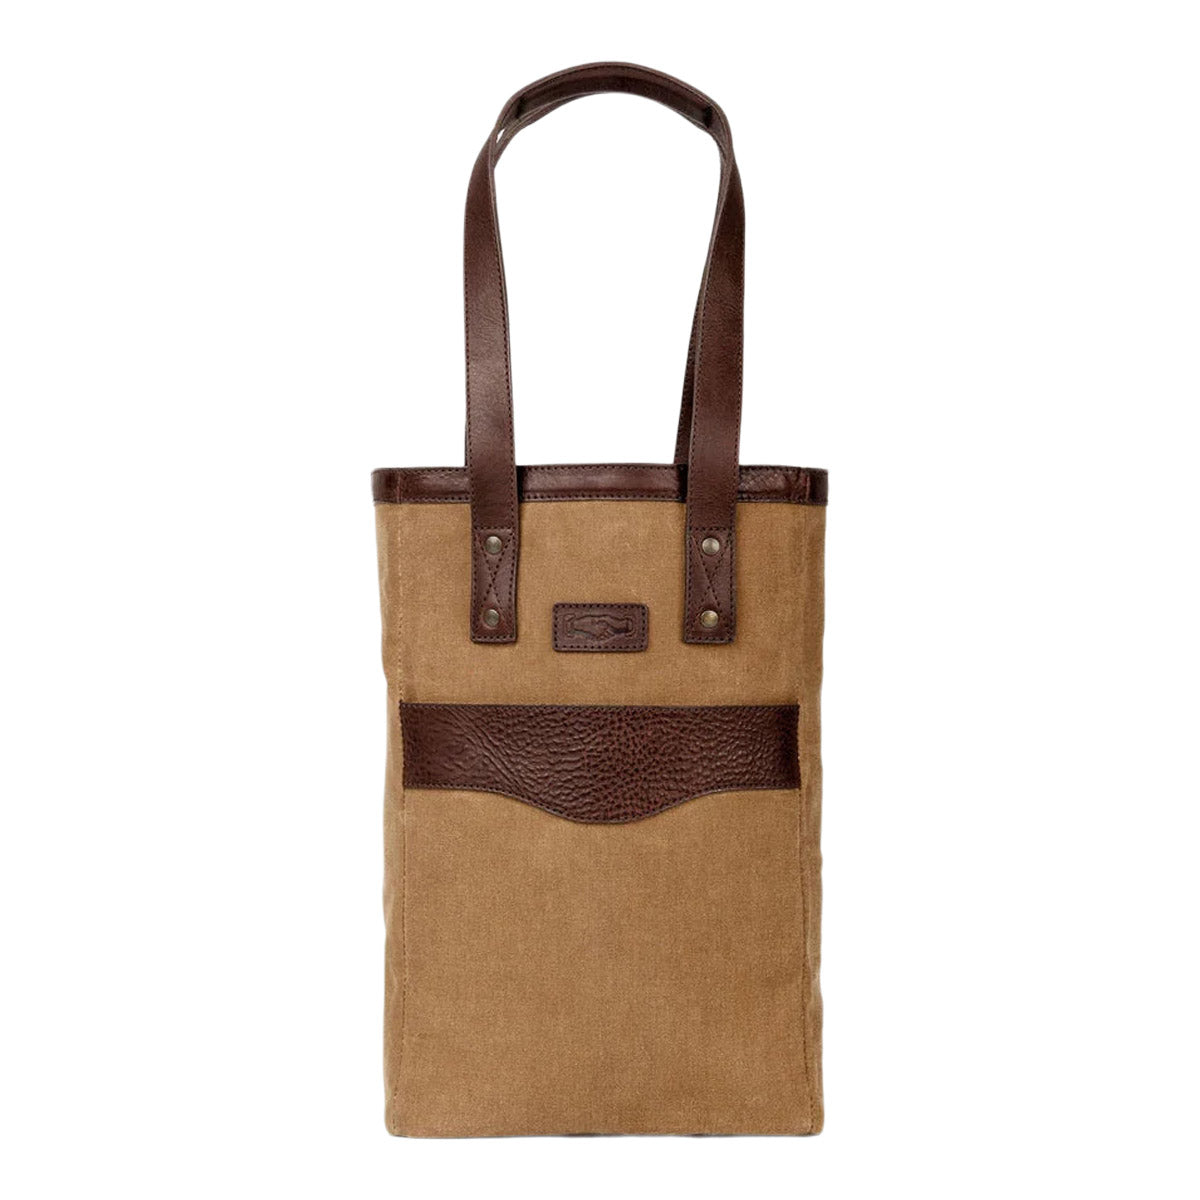 Mission Mercantile Waxed Canvas Two Bottle Wine Tote